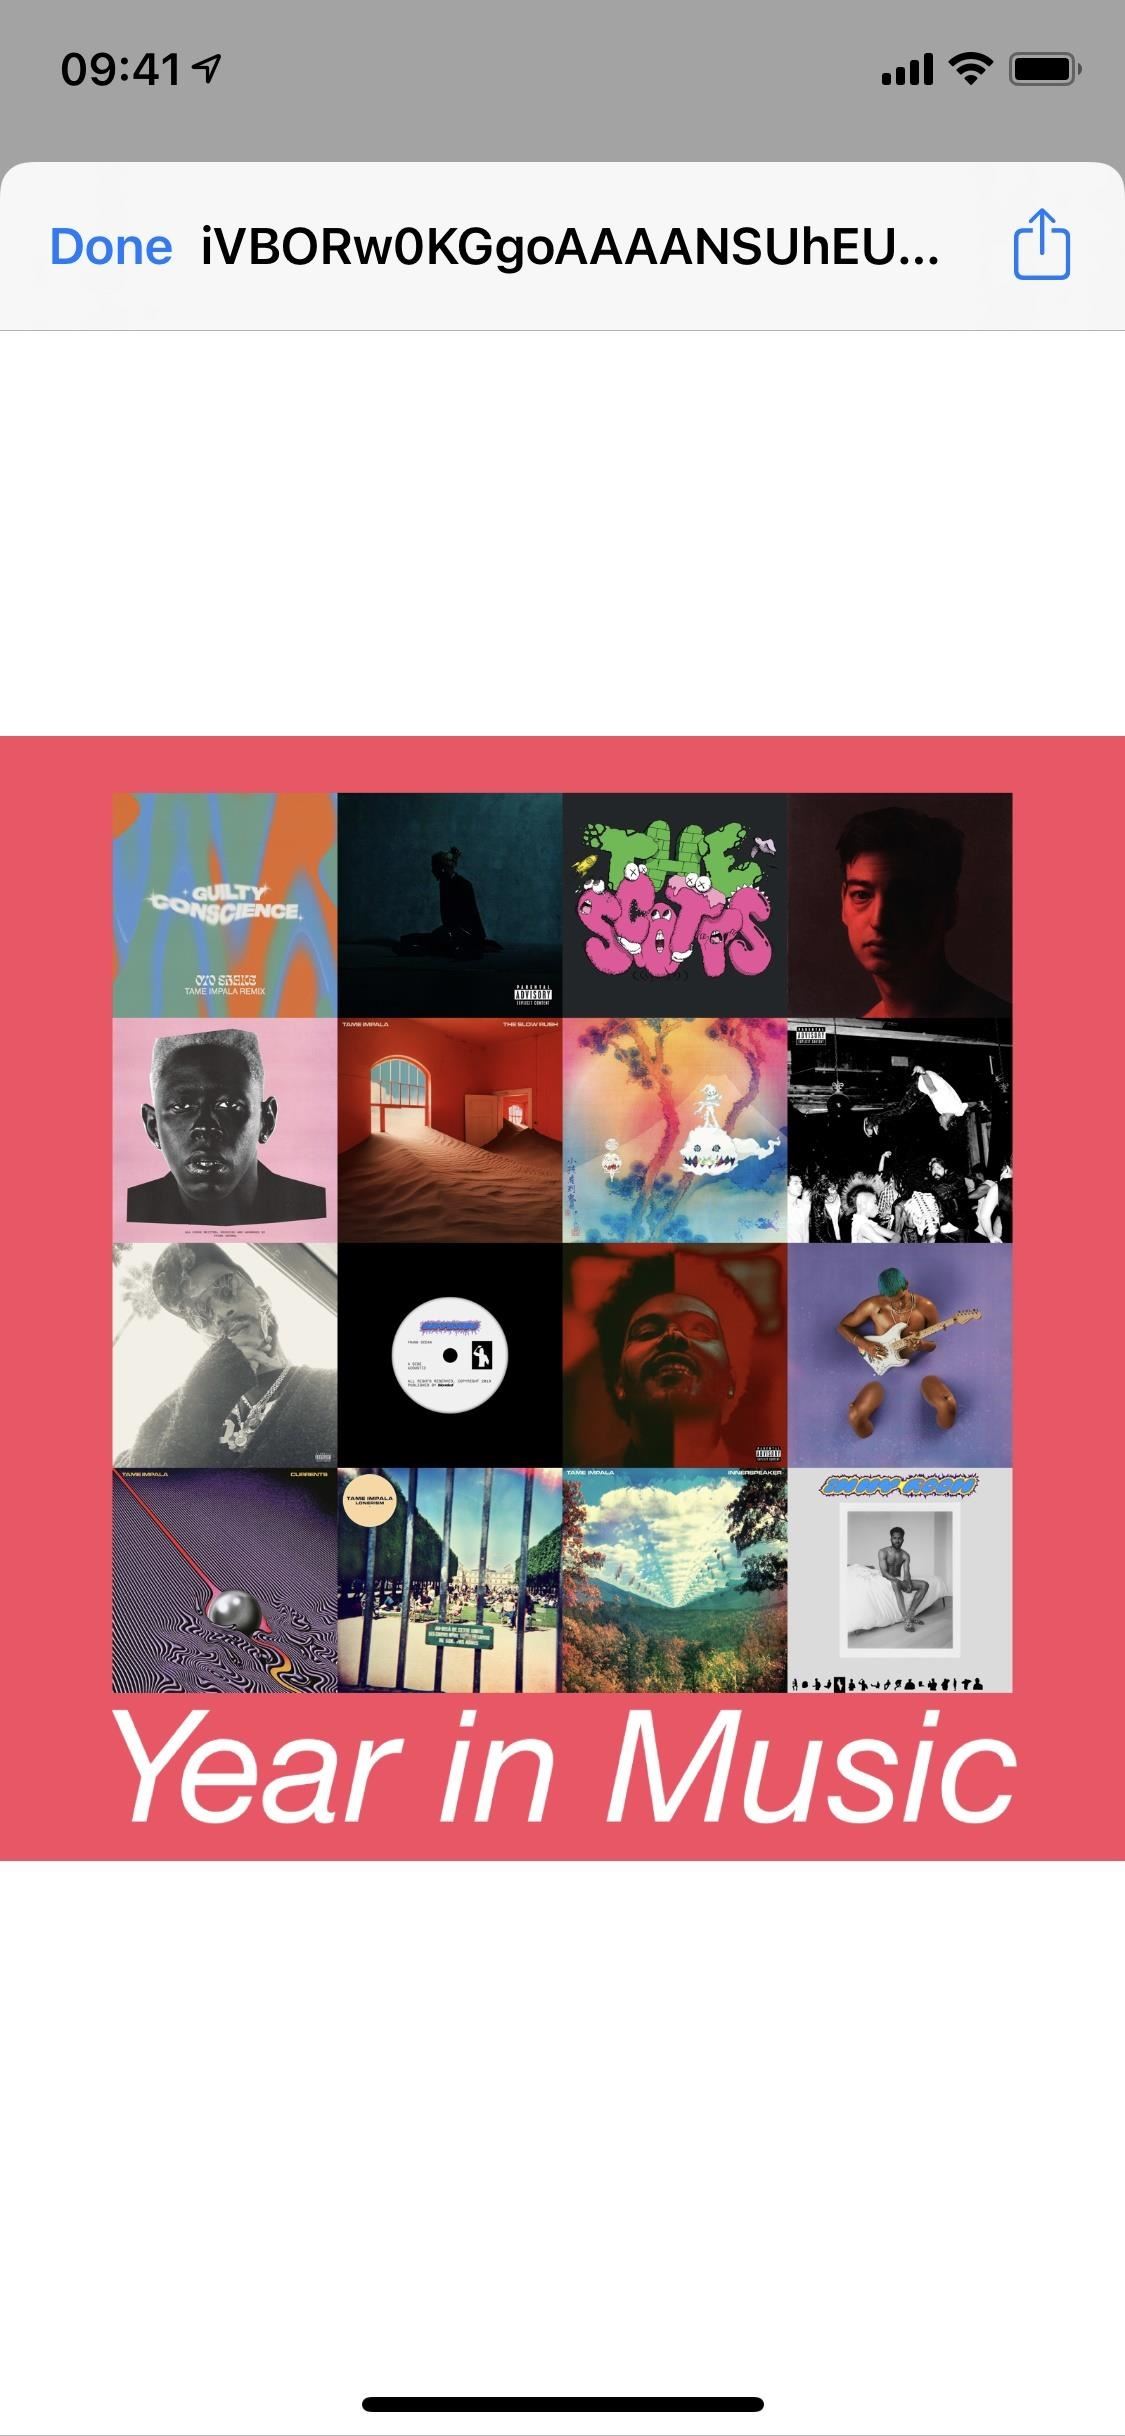 Create a 'My Year in Music' Cover Art Collage from Your iPhone's Music Library to Share on Social Media